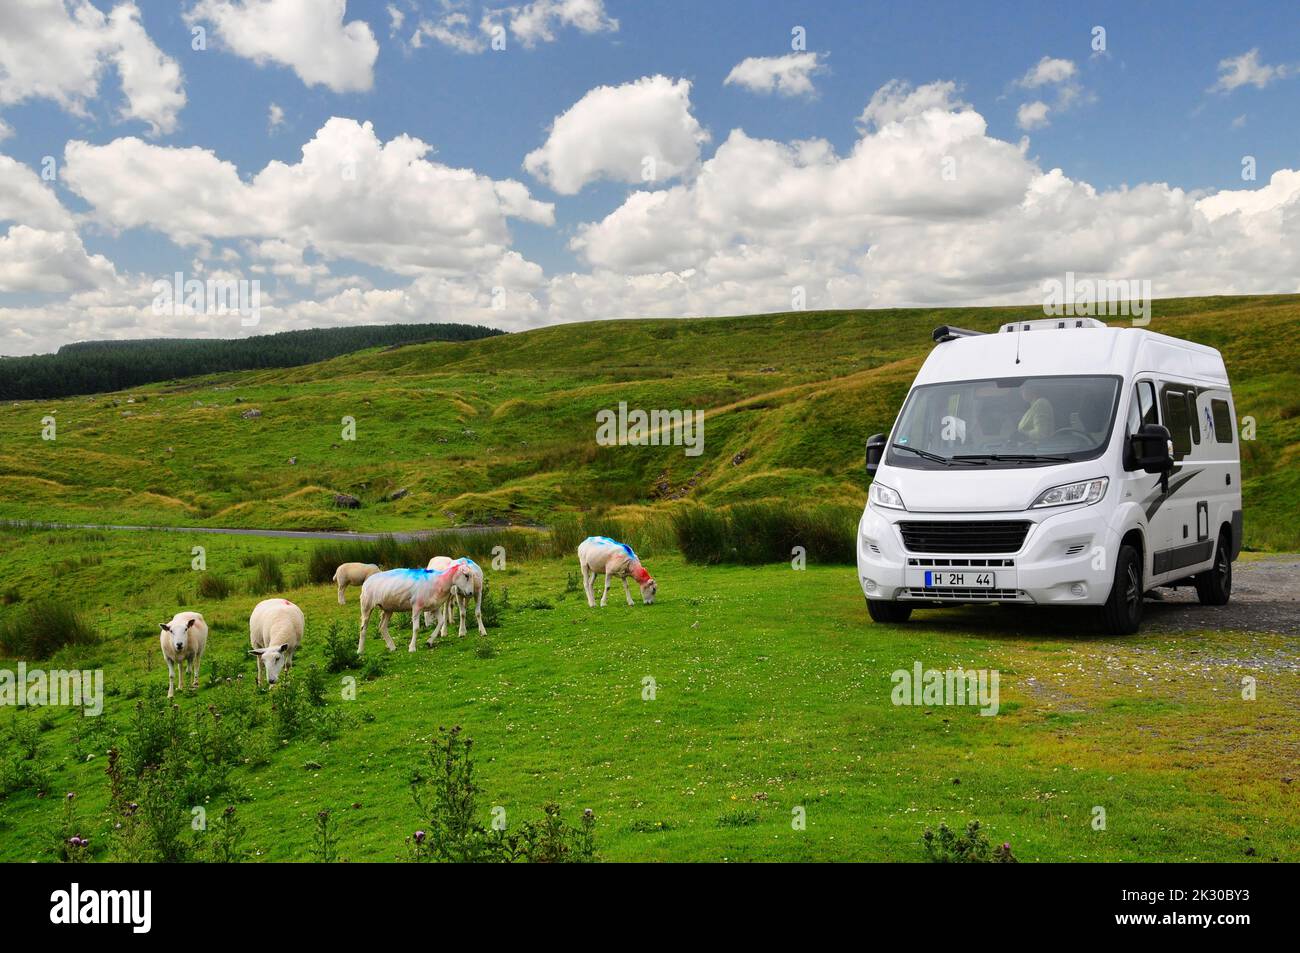 Motorhome in a car park in the Yorkshire Dales, Yorkshire, England, Great Britain, United Kingdom, Europe Stock Photo